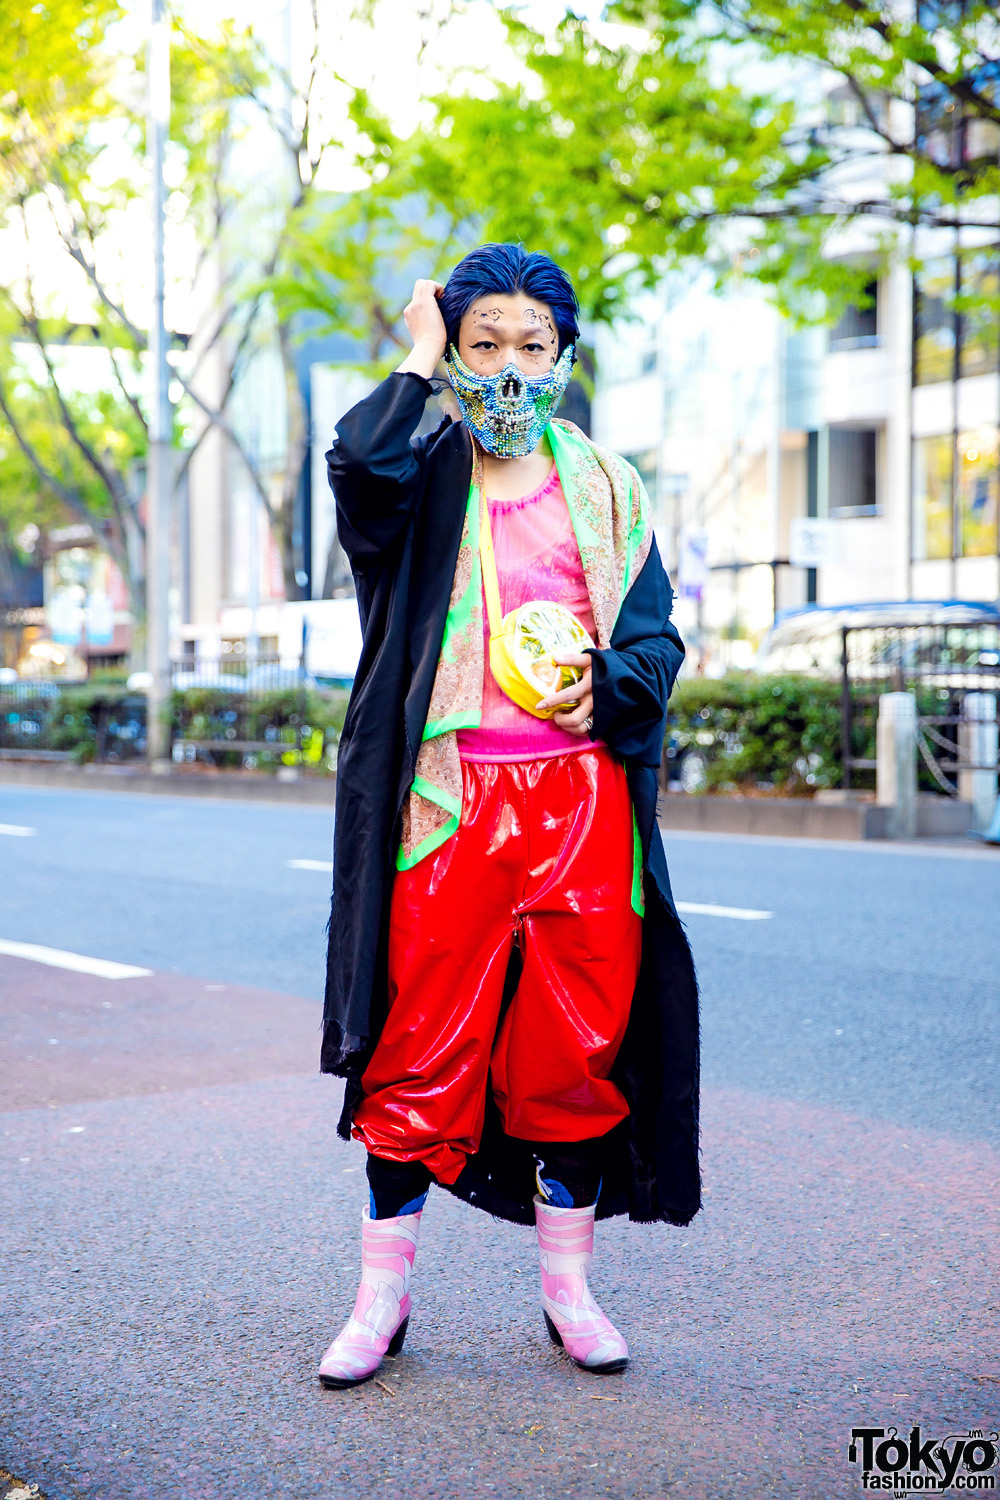 Tokyo Deconstructed Street Style w/ Blue Hair, Jeweled Mask, Sulvam Coat, Sheer Organza Top, Patent Pants & Rain Boots